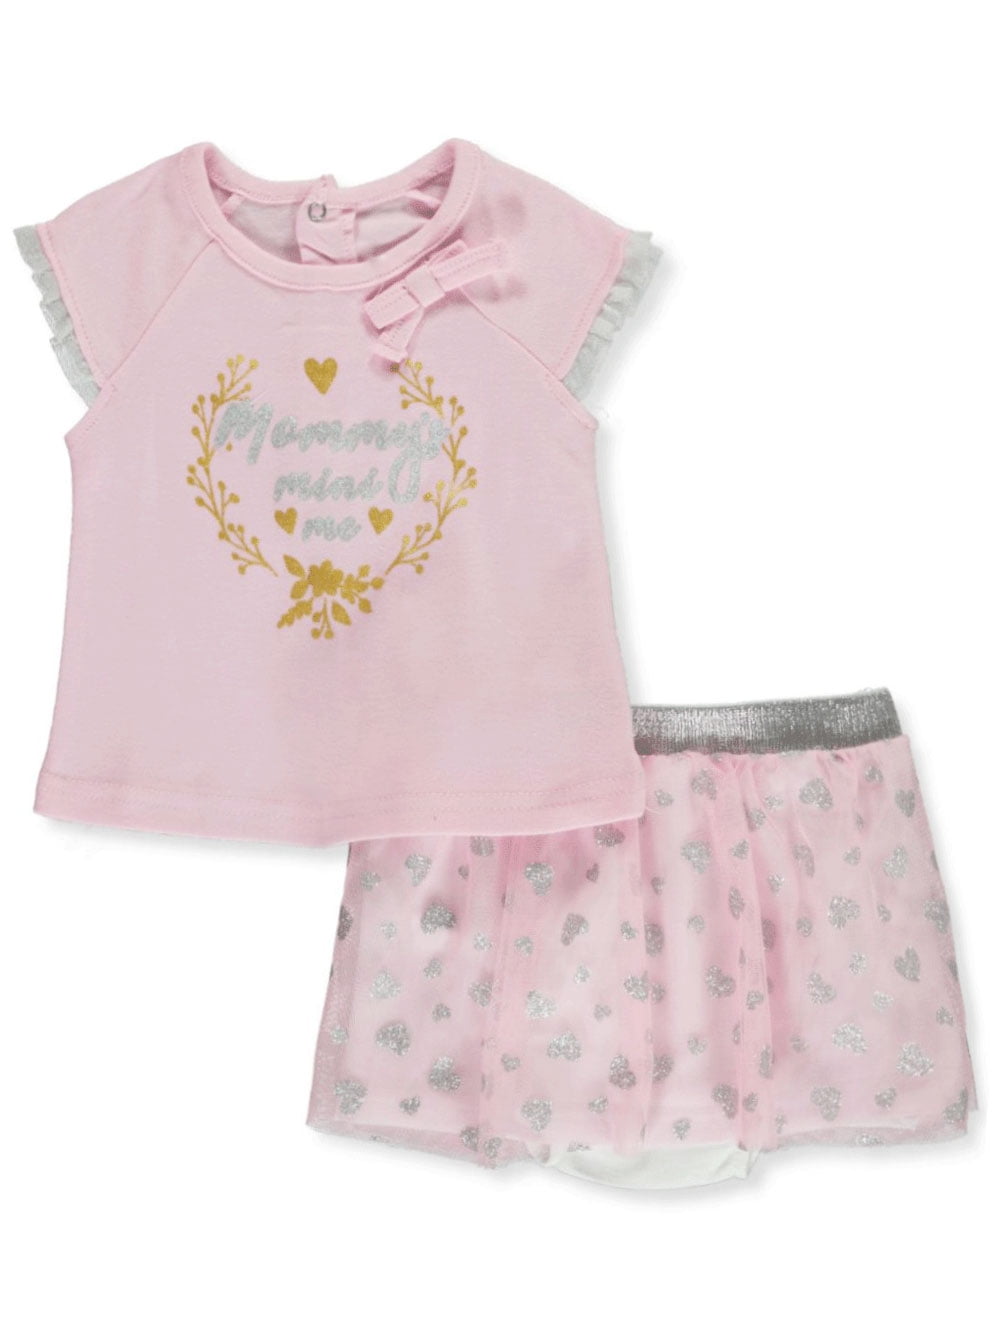 mommy's mini me baby clothes